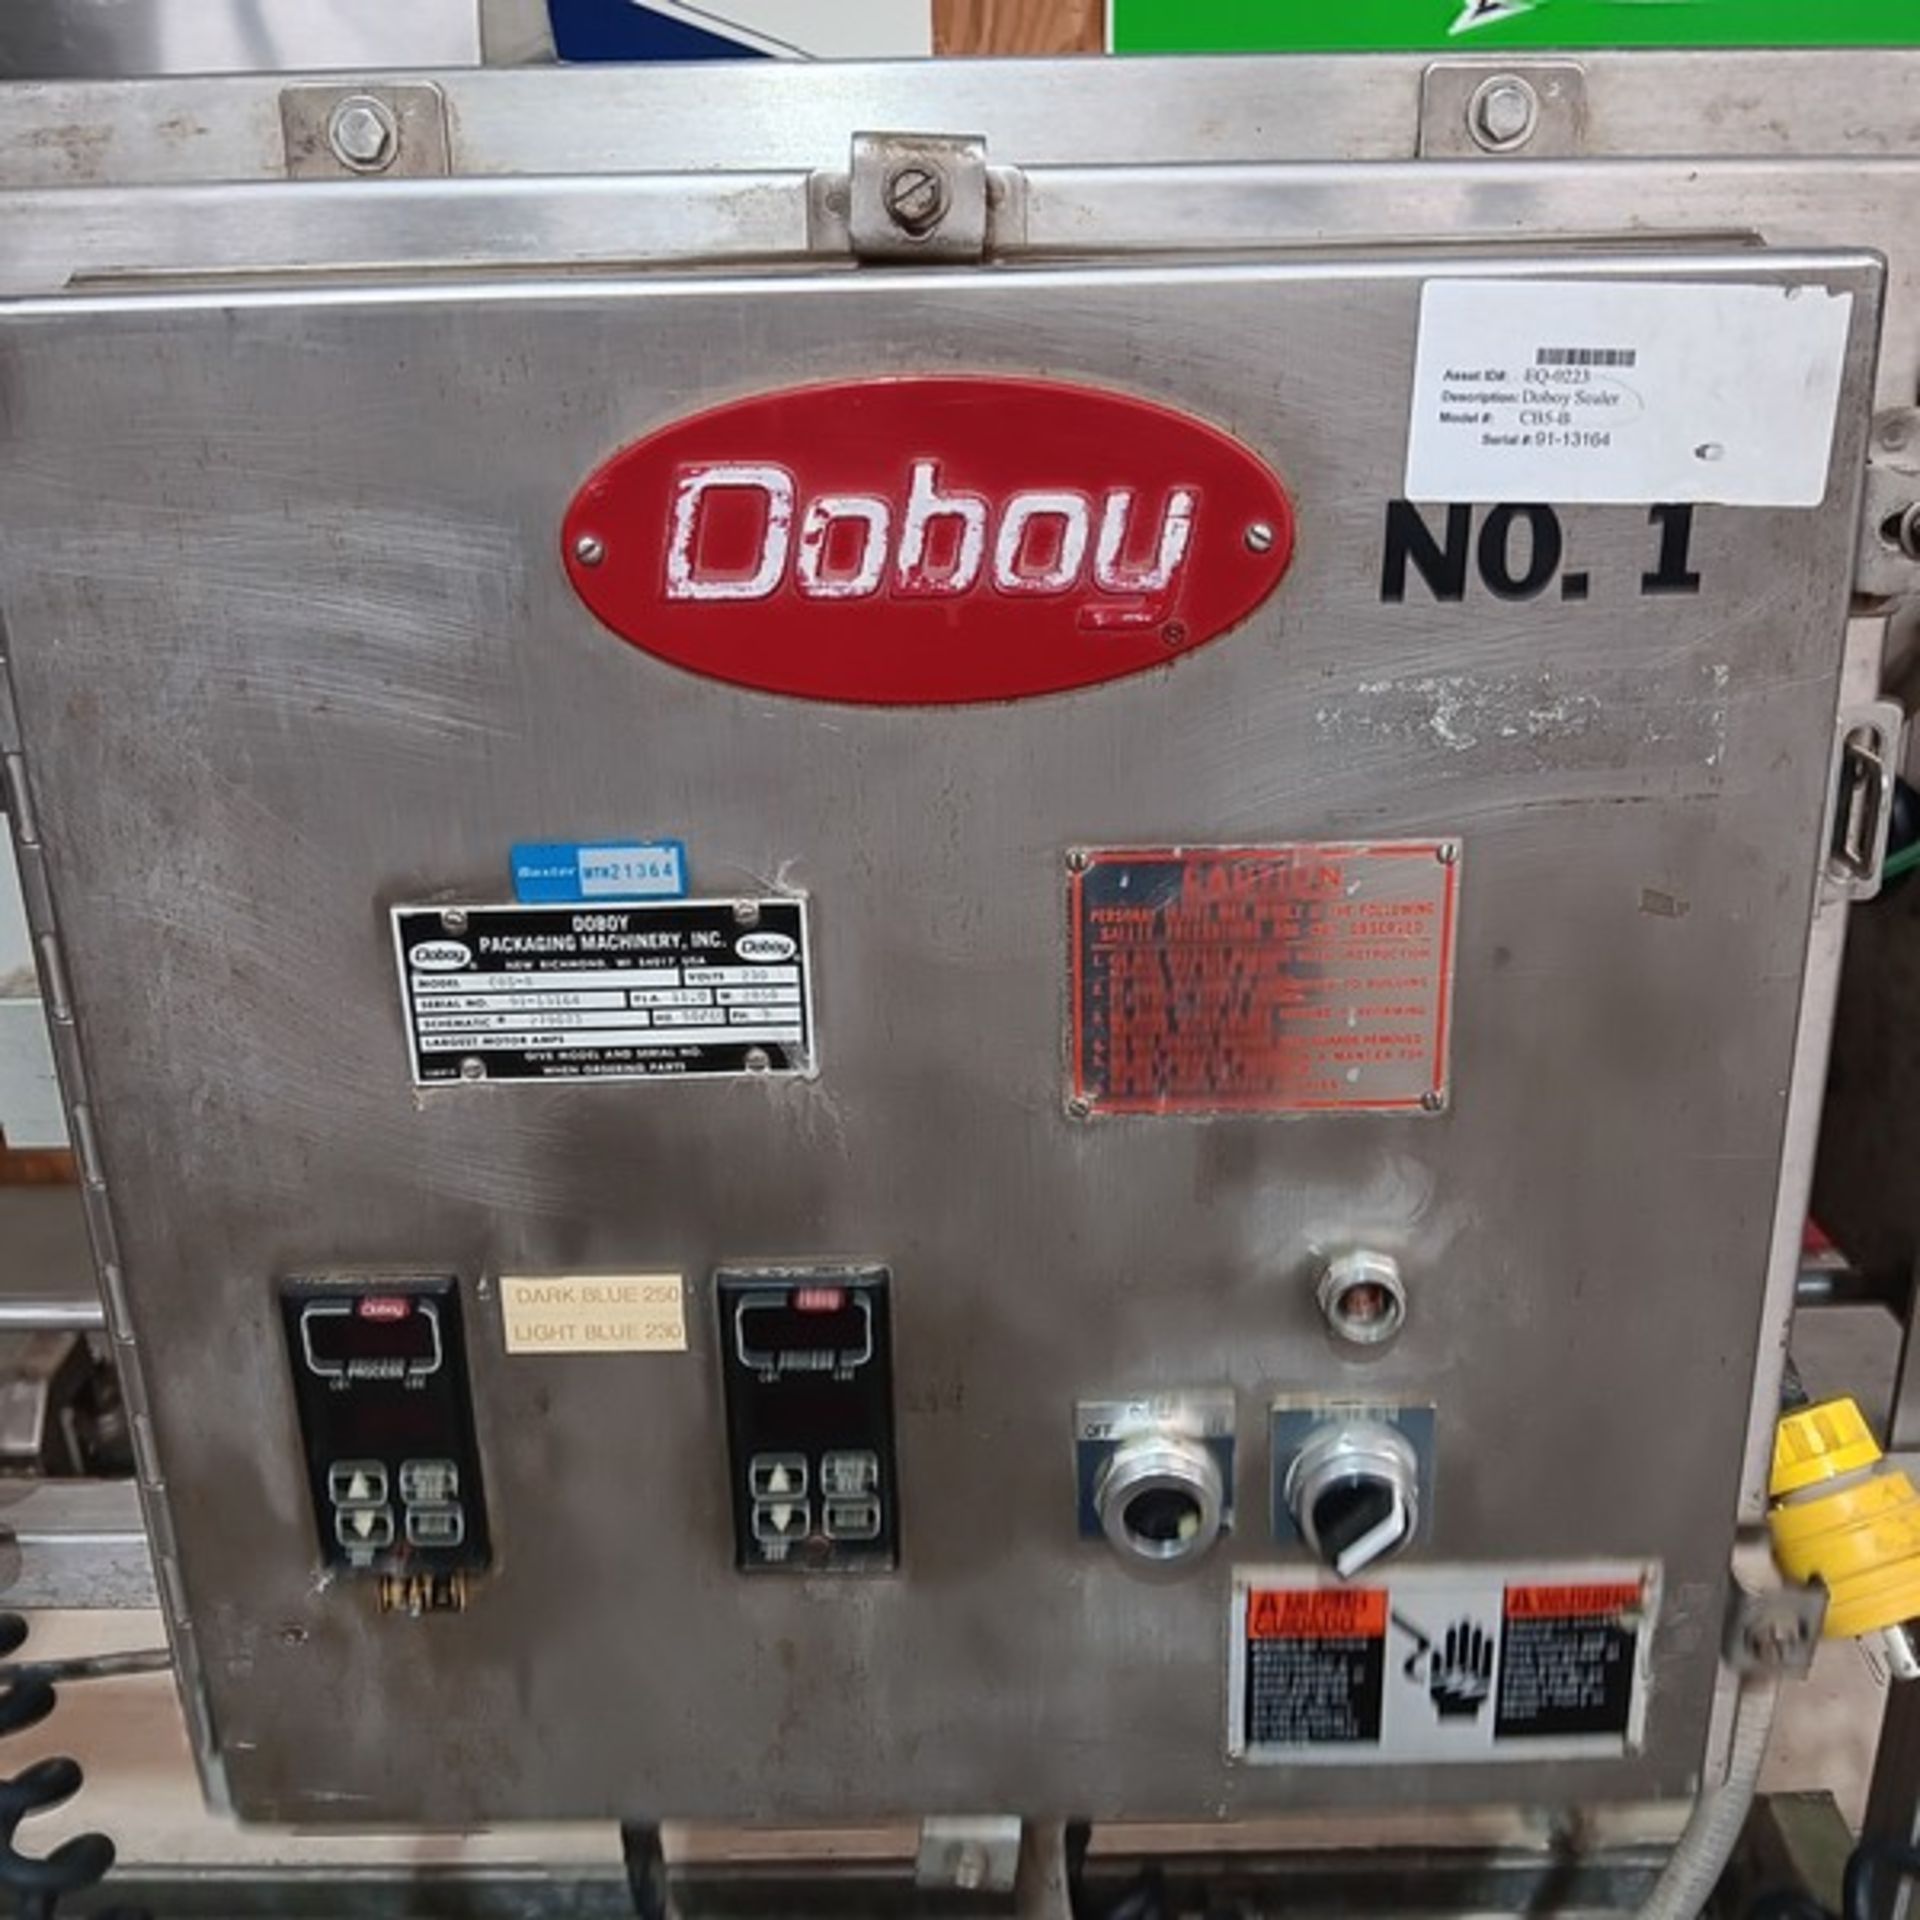 Doboy High Speed Continuous Band Bag Sealer Model CB5-B, S/N 91-13164, Volt 230, 3 Phase, Casters, - Image 4 of 5